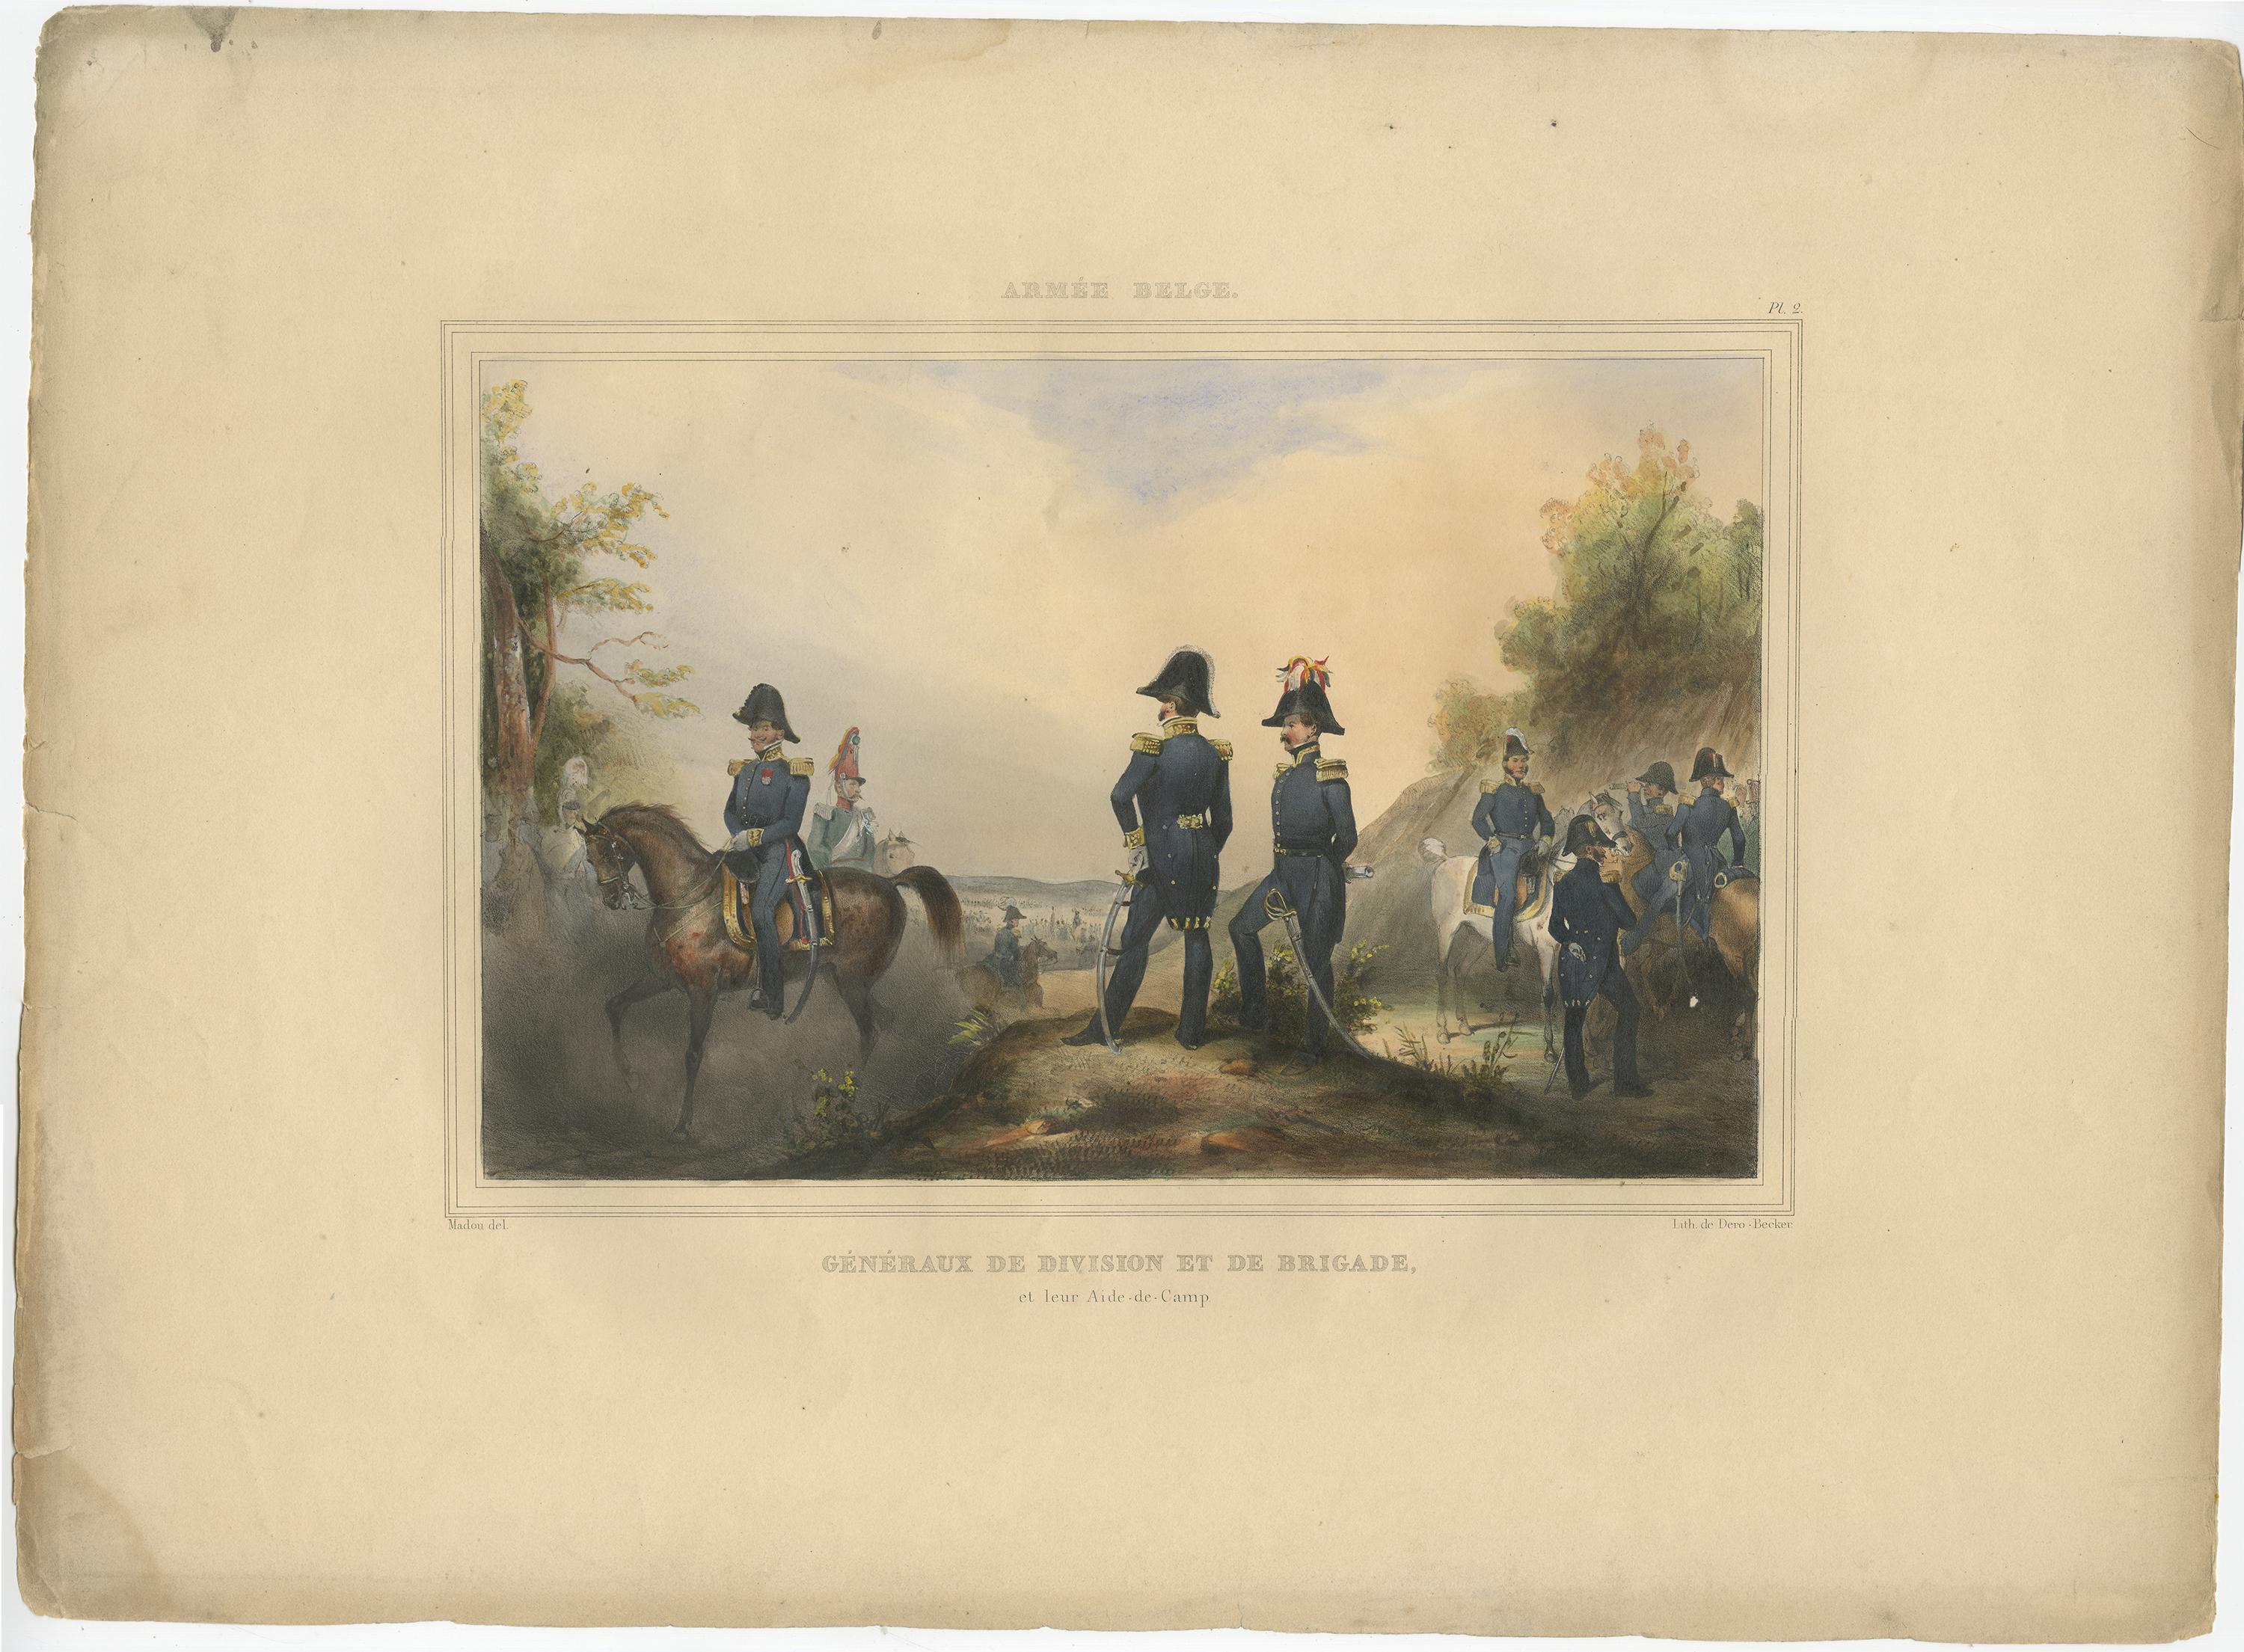 One nicely hand coloured print of an original serie of 23 plates, showing generals discussing matters. published in 1833. Rare.

From a serie of beautiful lithographed plates with Belgian military costumes after Madou and printed by Dero-Becker.